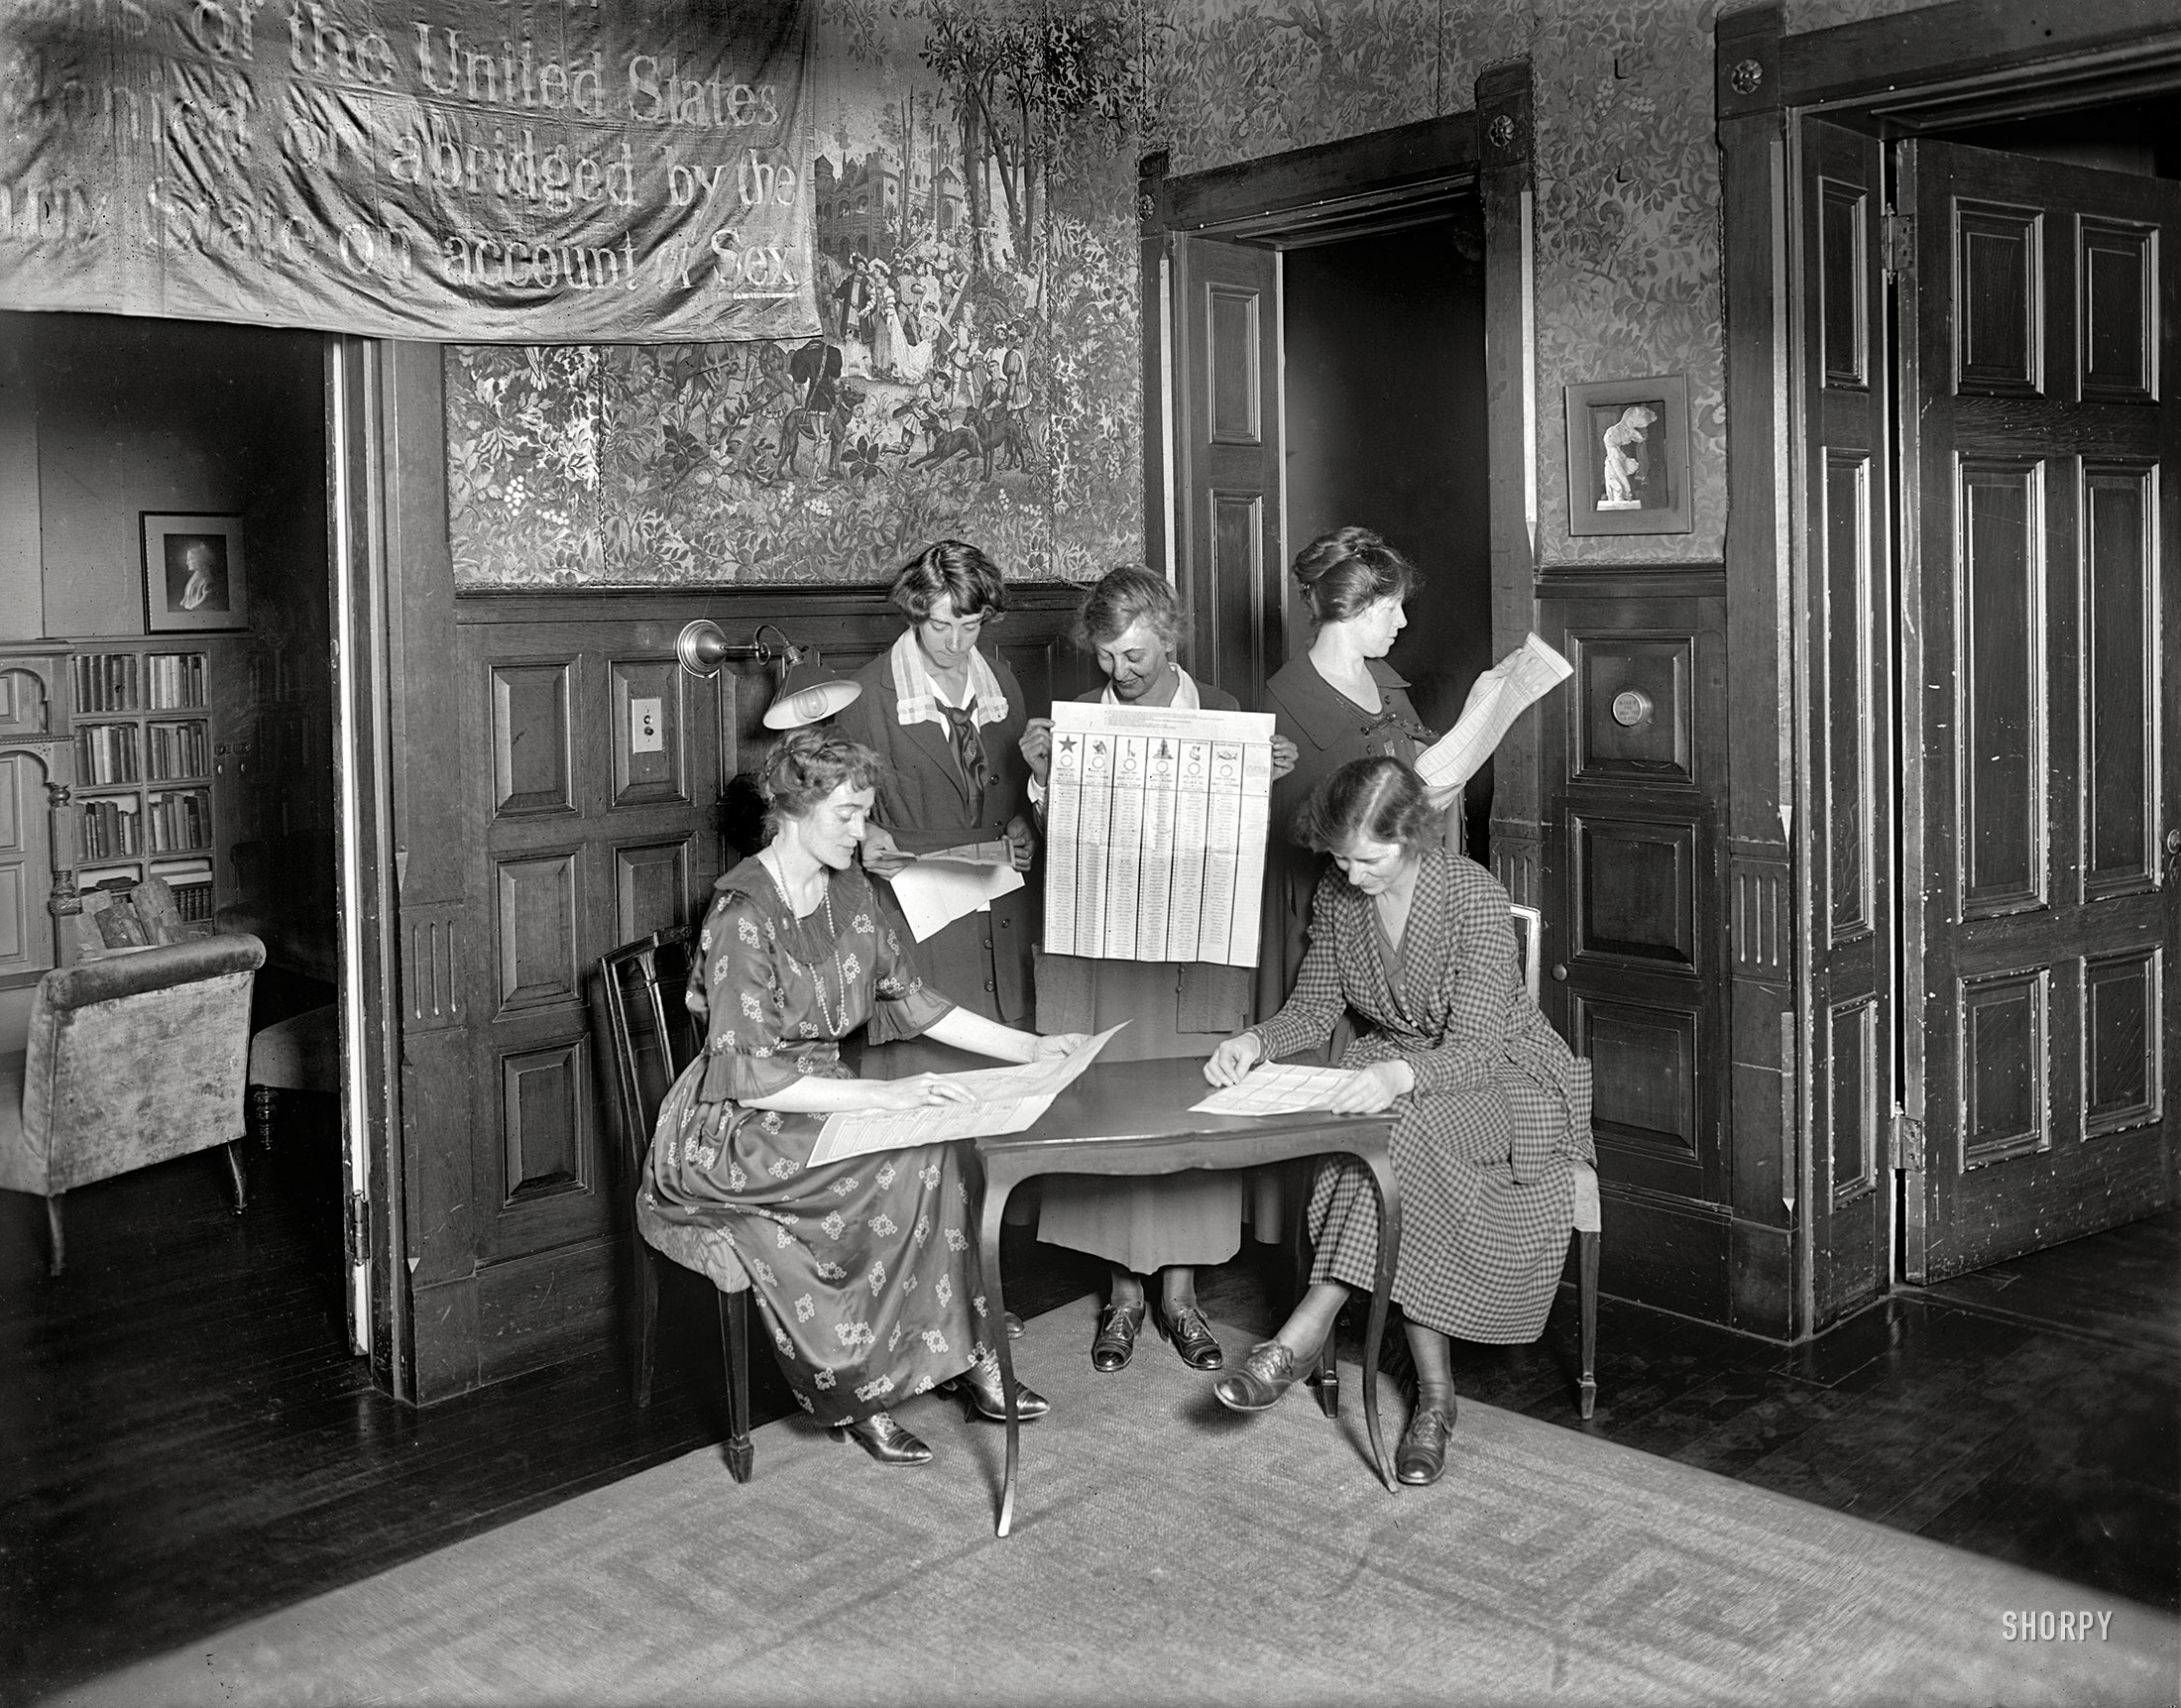 Washington, D.C., 1920. "Suffragettes voting." An inspiration to us all! National Photo Company Collection glass negative. View full size.